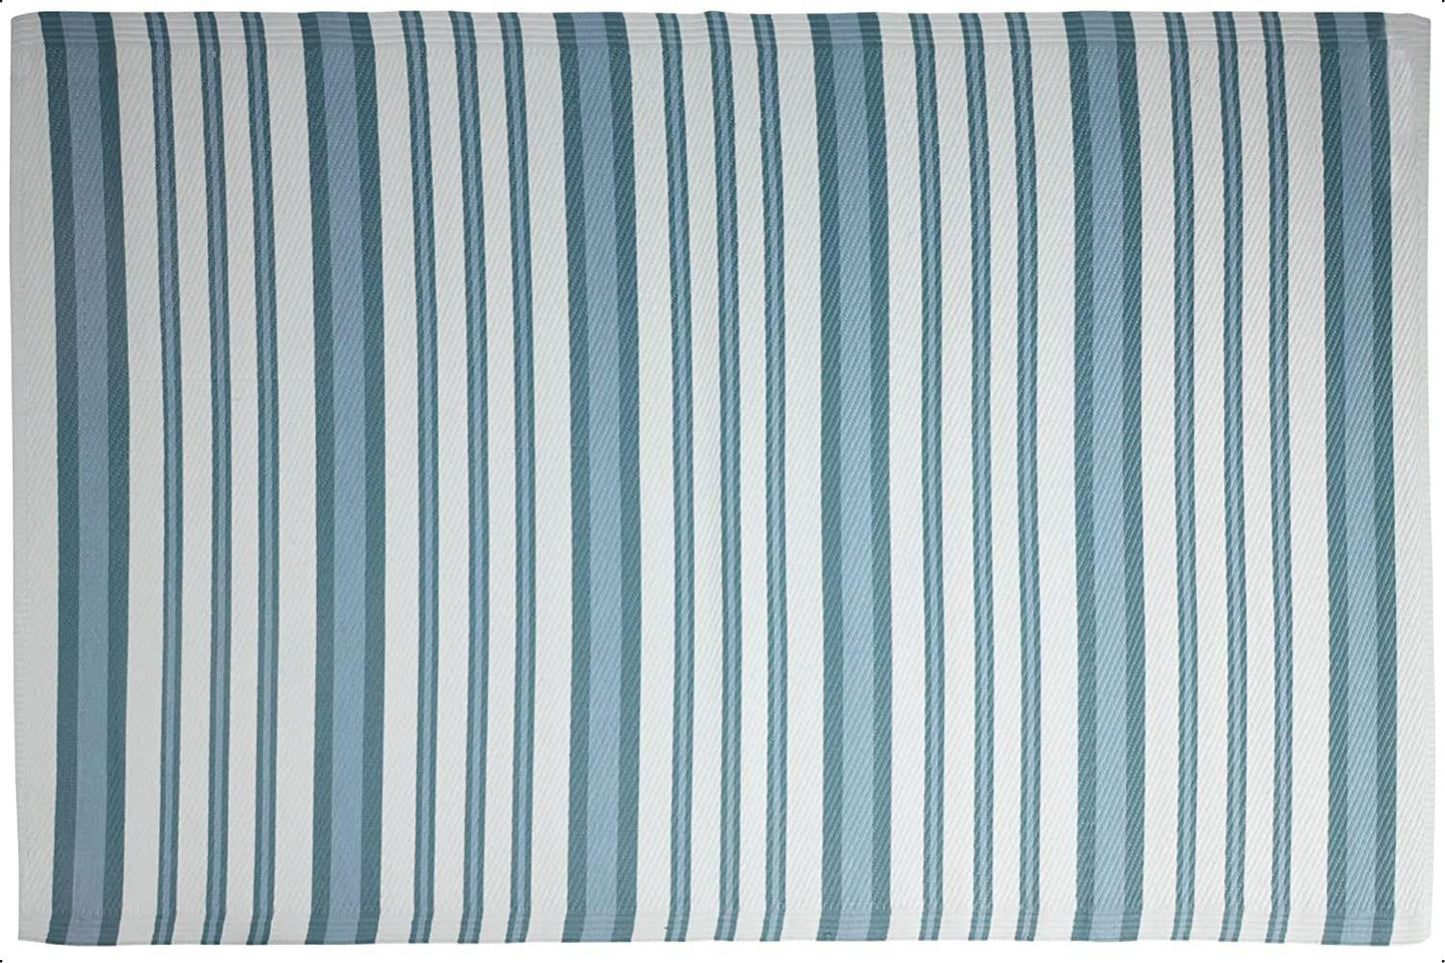 Outdoor Camping Rug Stripes 120 x 180cm Green Blue Grey